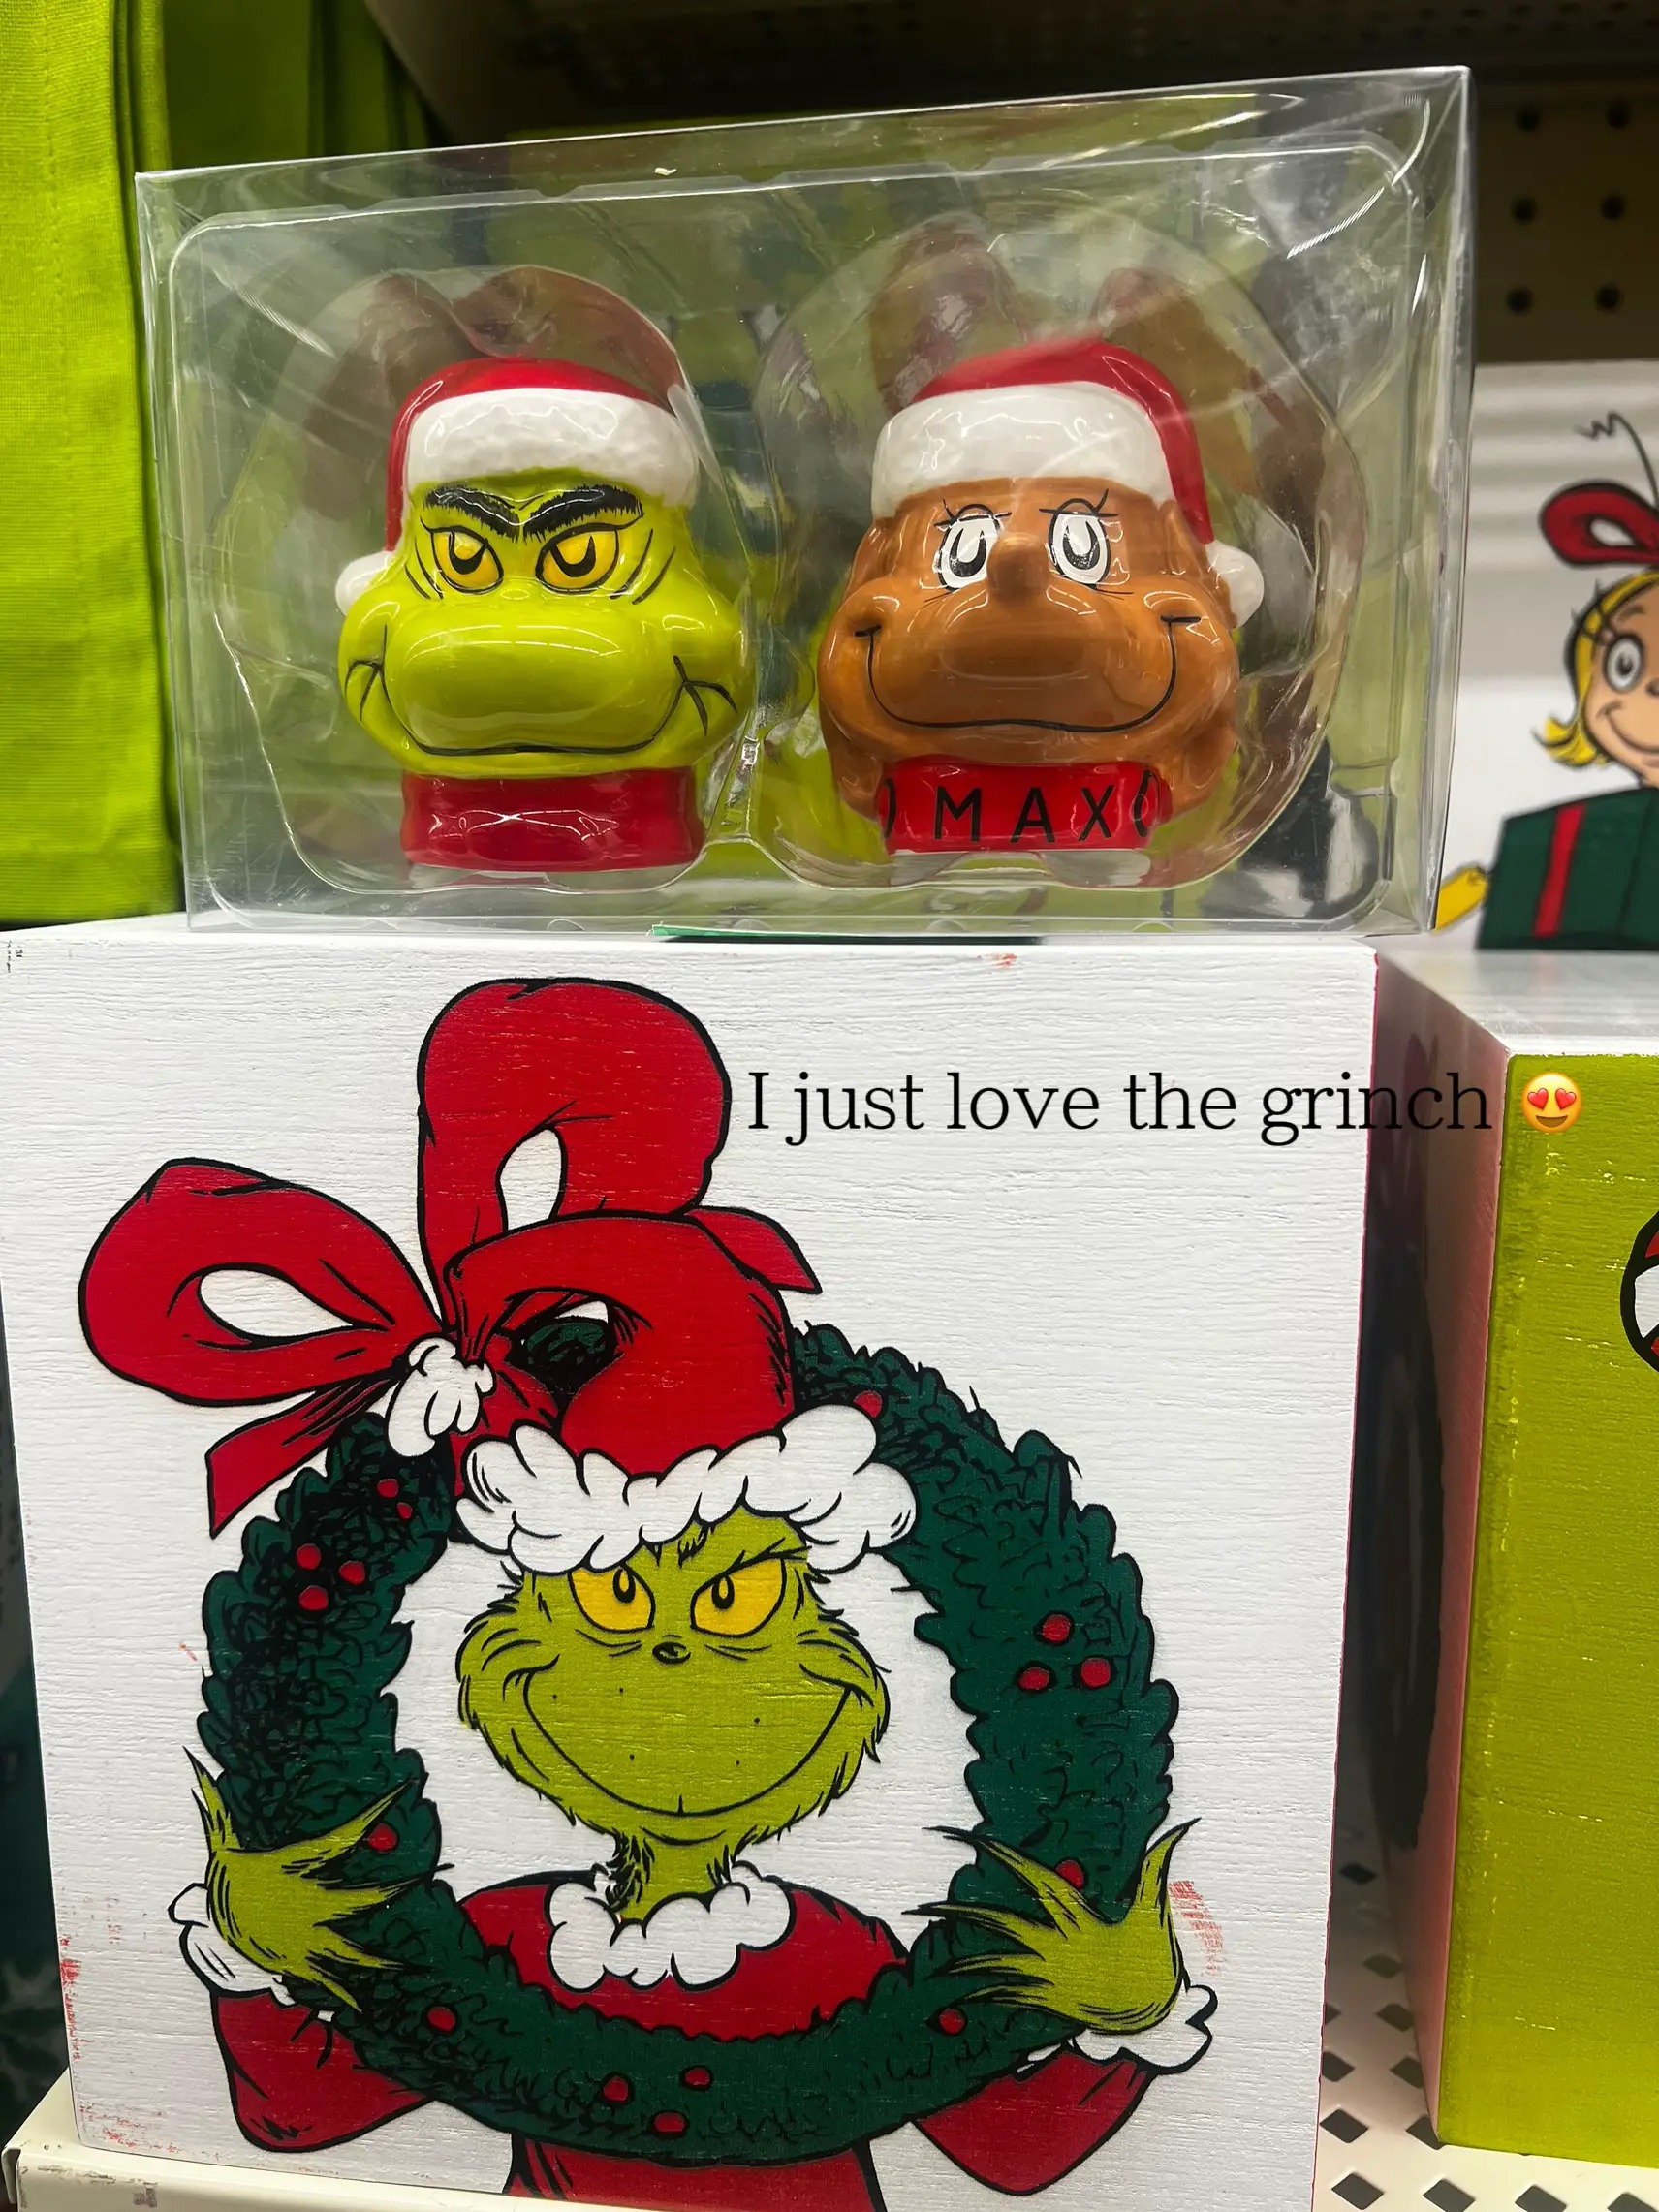 Hobby lobby Grinch collection!, Gallery posted by Sarah